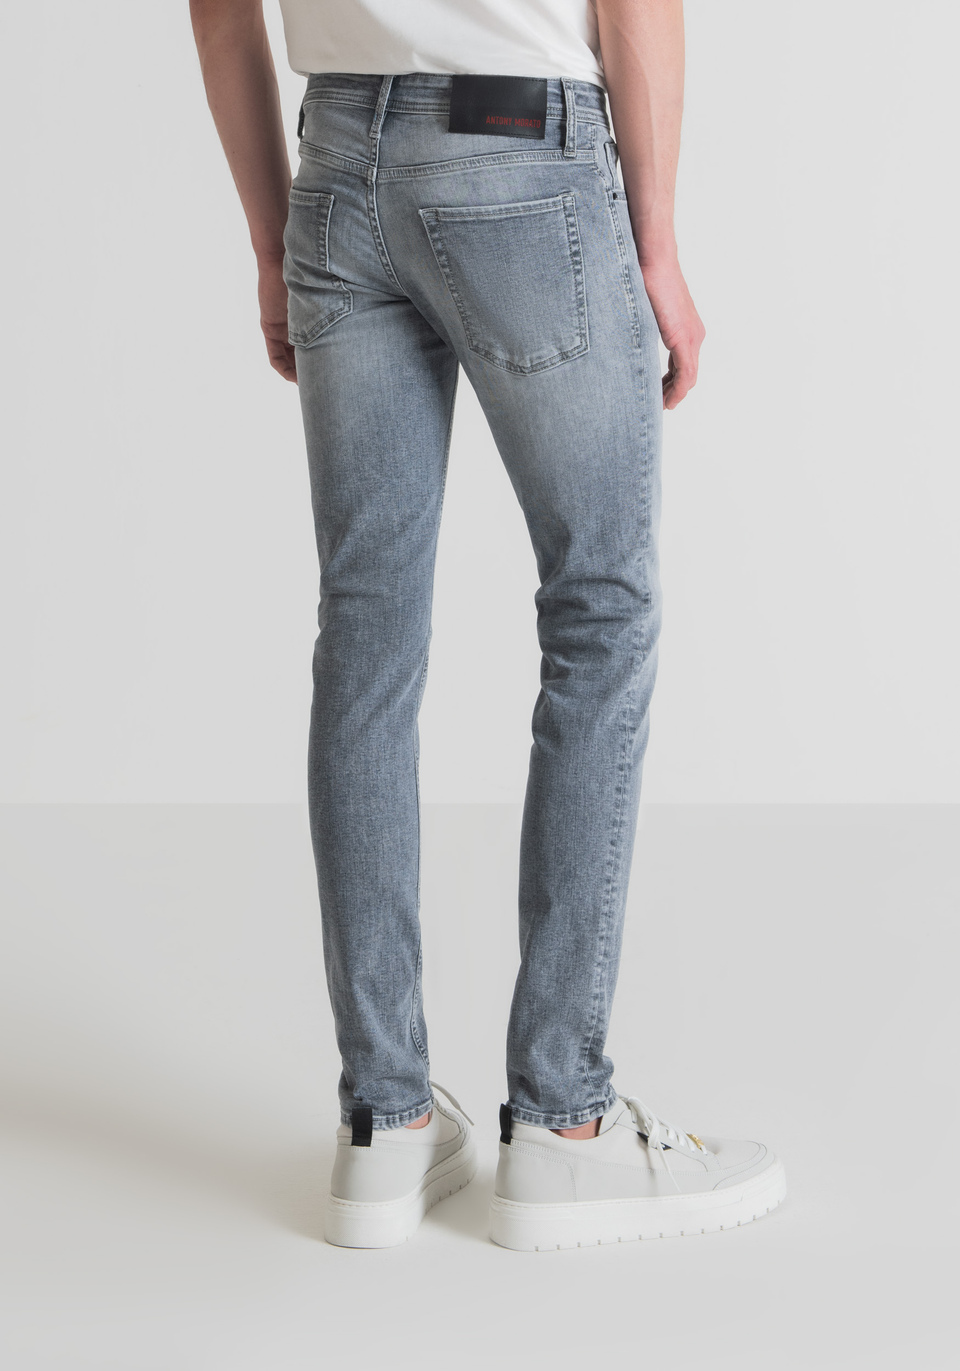 "OZZY" TAPERED FIT JEANS IN STRETCH DENIM WITH GREY WASH - Antony Morato Online Shop